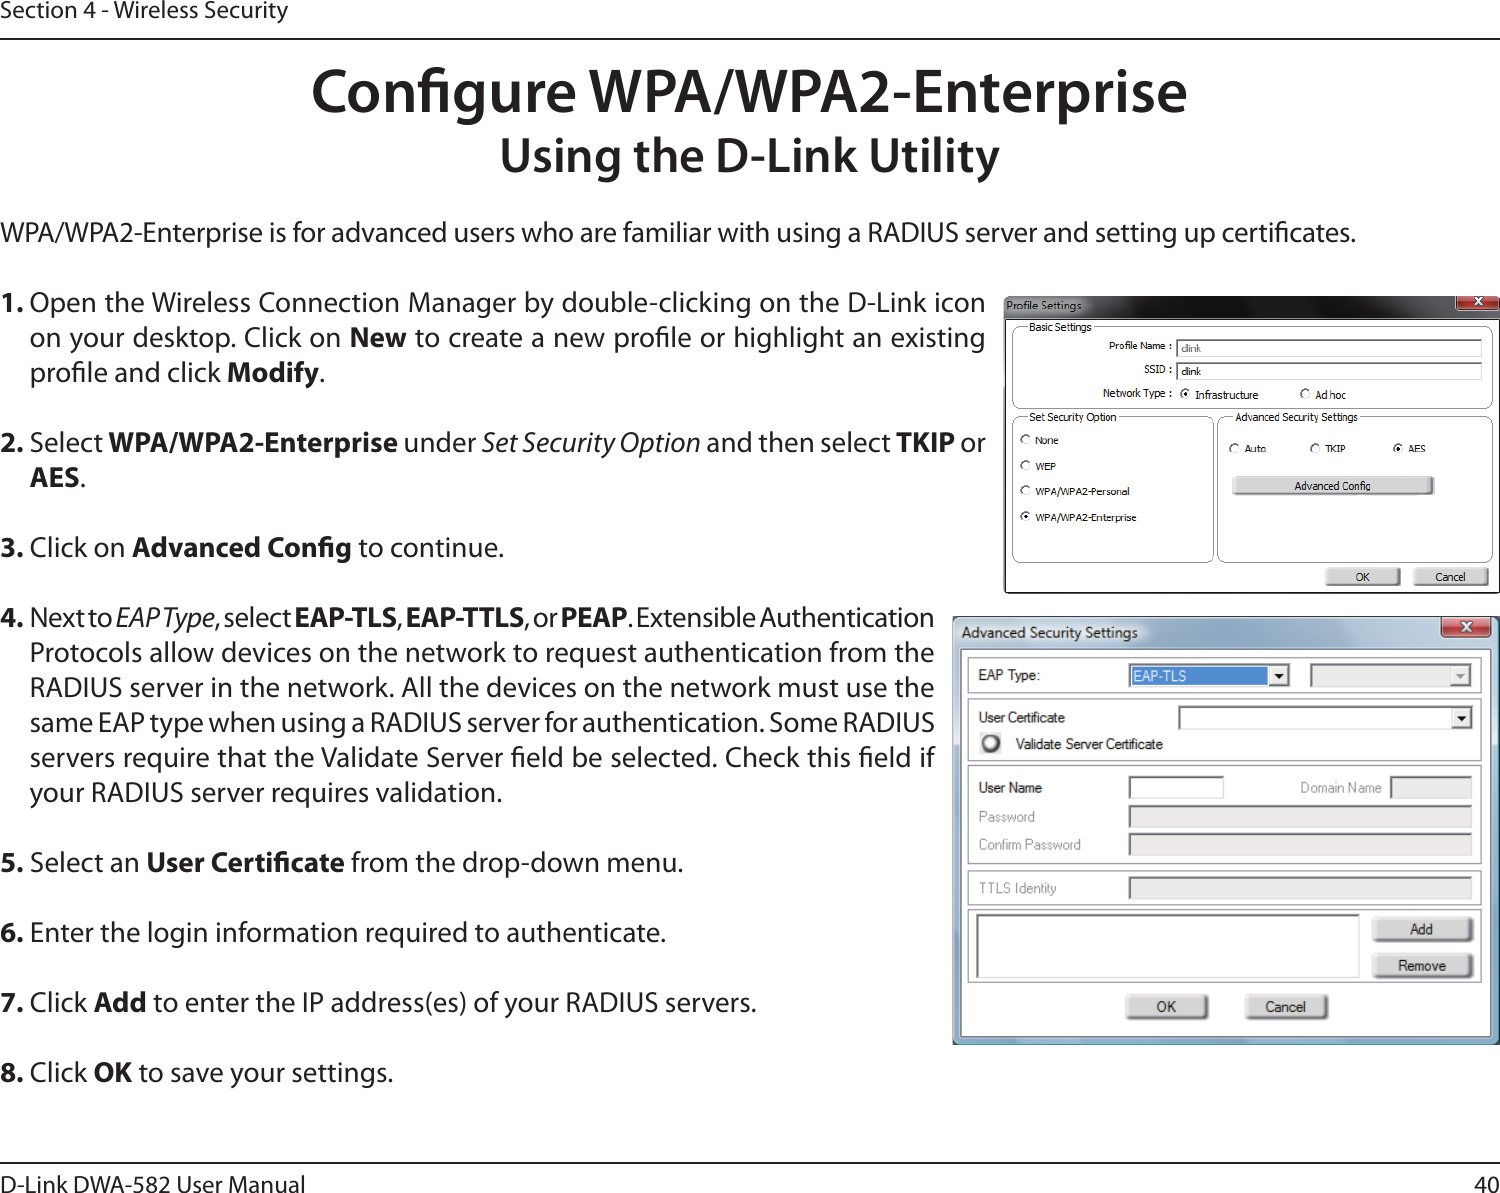 40D-Link DWA-582 User ManualSection 4 - Wireless SecurityCongure WPA/WPA2-EnterpriseUsing the D-Link UtilityWPA/WPA2-Enterprise is for advanced users who are familiar with using a RADIUS server and setting up certicates.1. Open the Wireless Connection Manager by double-clicking on the D-Link icon on your desktop. Click on New to create a new prole or highlight an existing prole and click Modify. 2. Select WPA/WPA2-Enterprise under Set Security Option and then select TKIP or AES.3. Click on Advanced Cong to continue.4. Next to EAP Type, select EAP-TLS, EAP-TTLS, or PEAP. Extensible Authentication Protocols allow devices on the network to request authentication from the RADIUS server in the network. All the devices on the network must use the same EAP type when using a RADIUS server for authentication. Some RADIUS servers require that the Validate Server eld be selected. Check this eld if your RADIUS server requires validation.5. Select an User Certicate from the drop-down menu.6. Enter the login information required to authenticate.7. Click Add to enter the IP address(es) of your RADIUS servers.8. Click OK to save your settings.